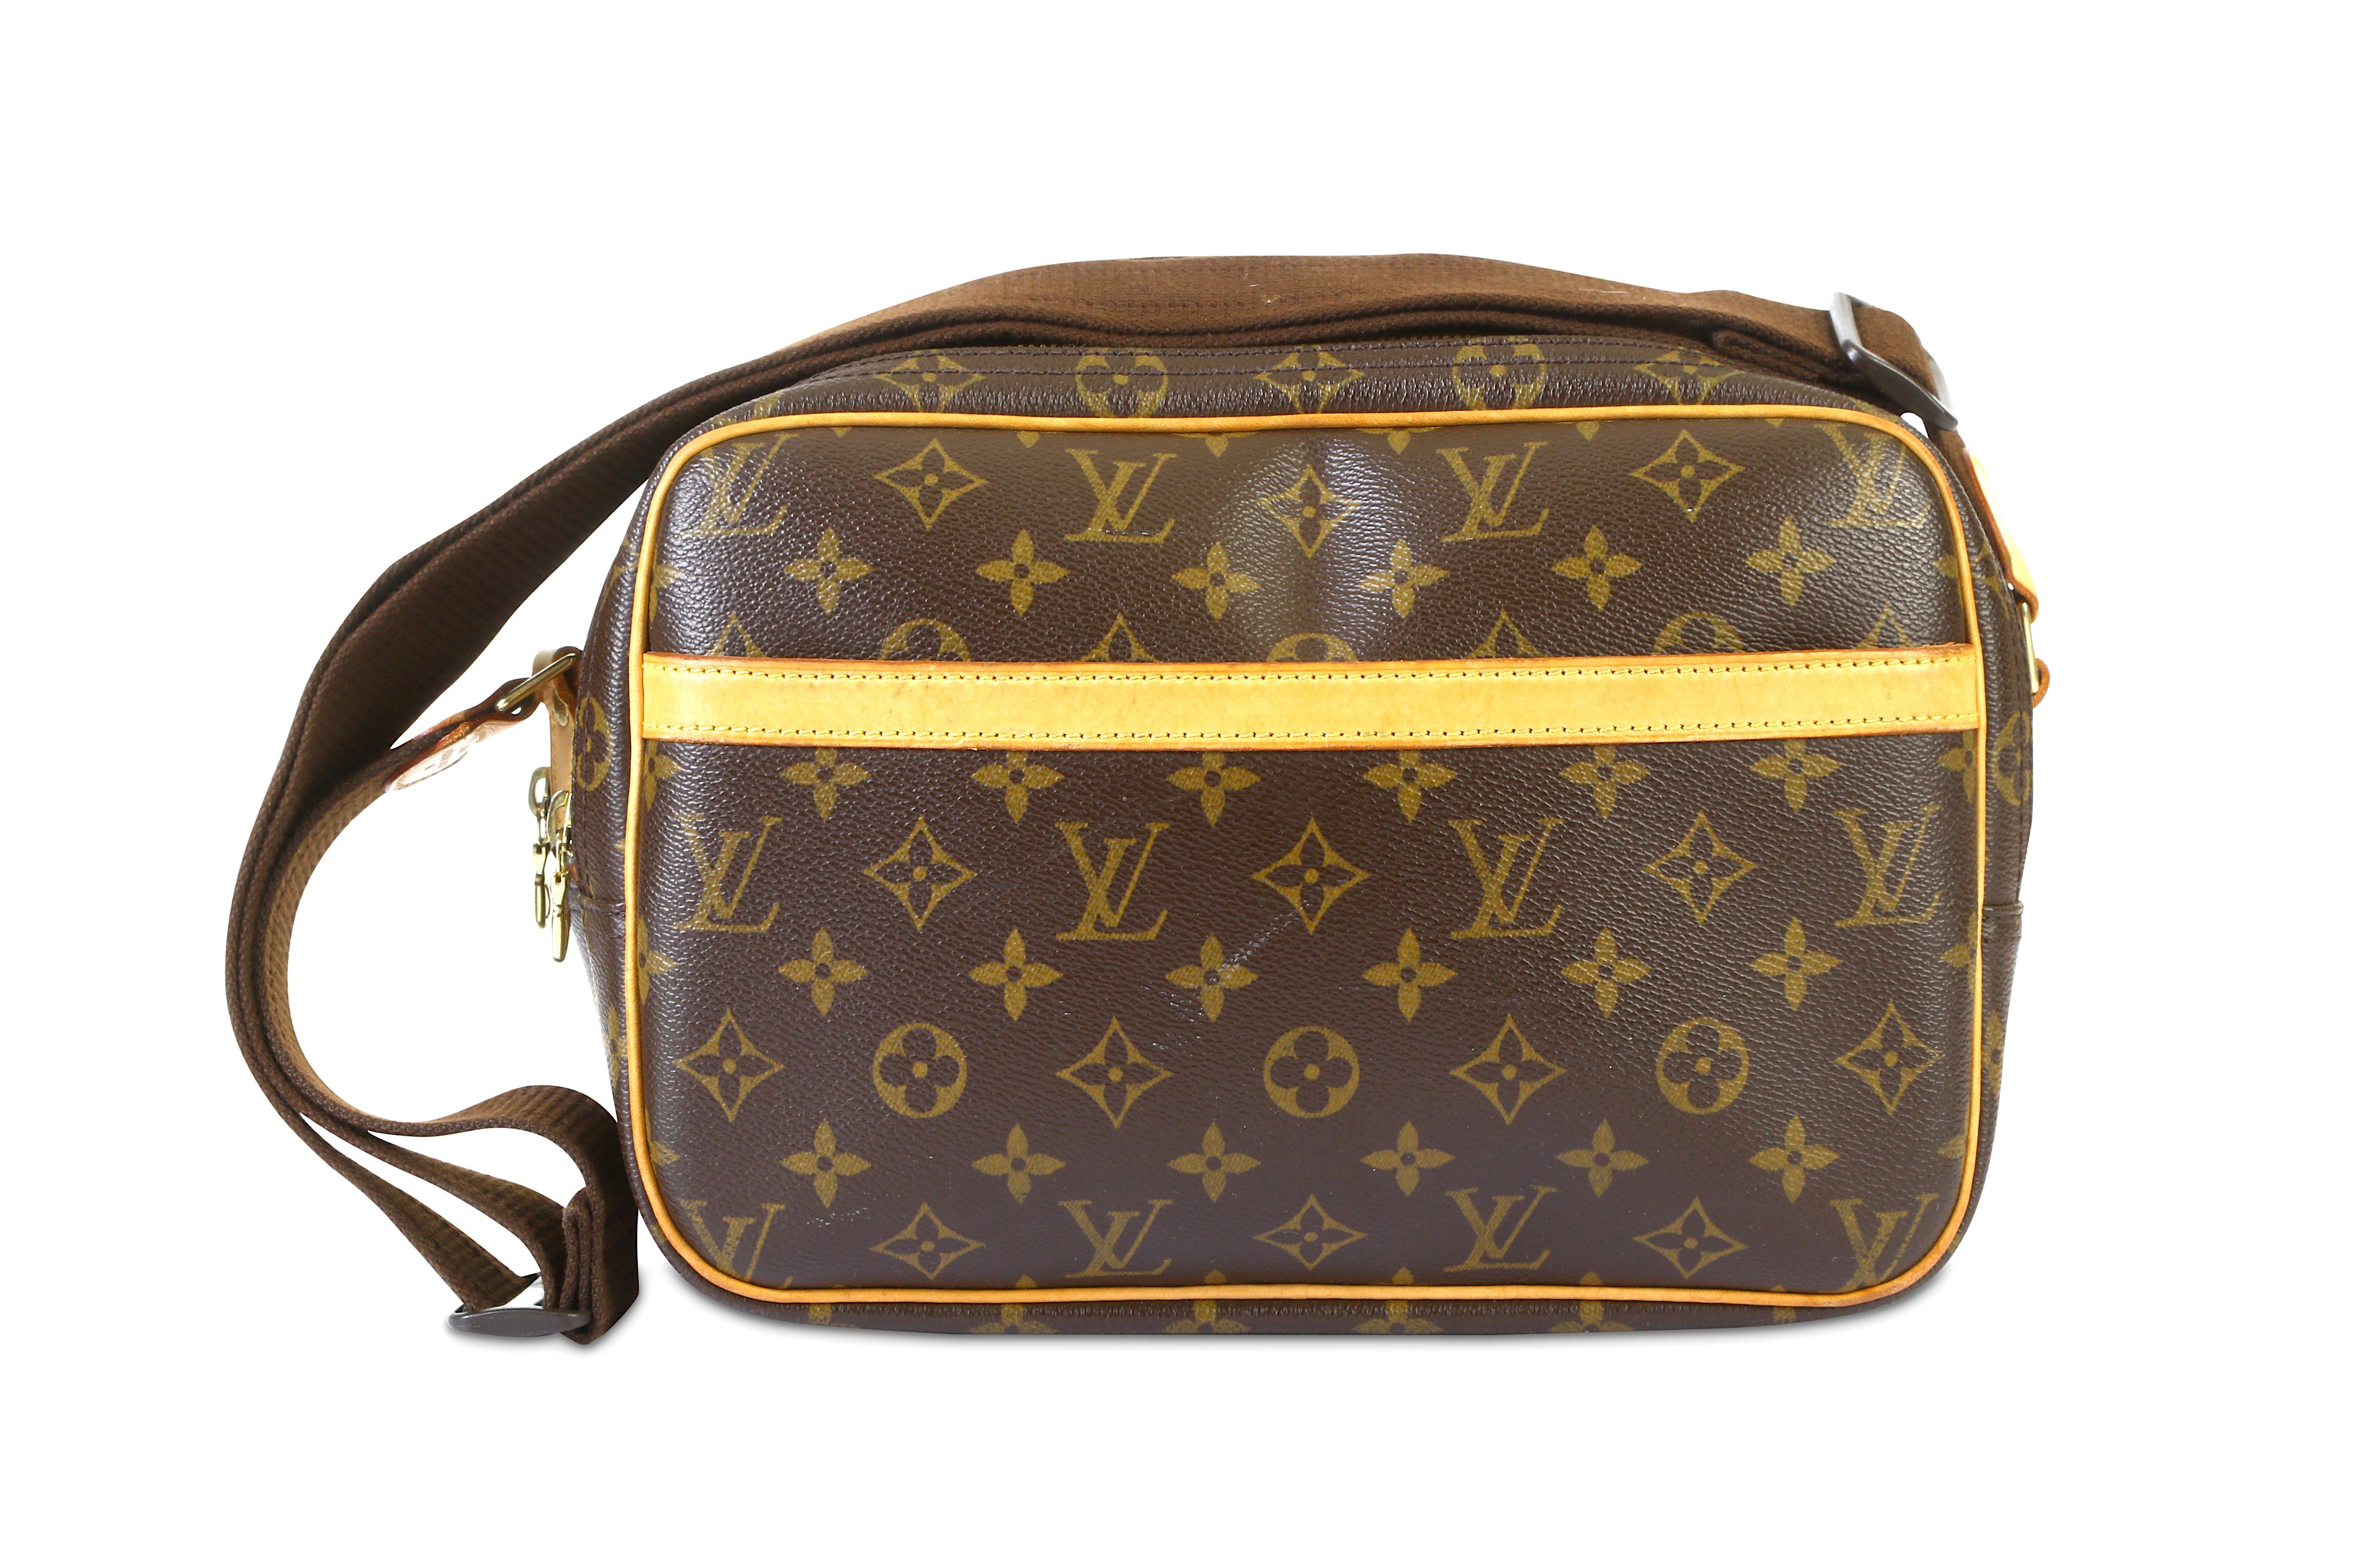 Sold at Auction: Vintage Louis Vuitton Reporter GM Brown and Tan